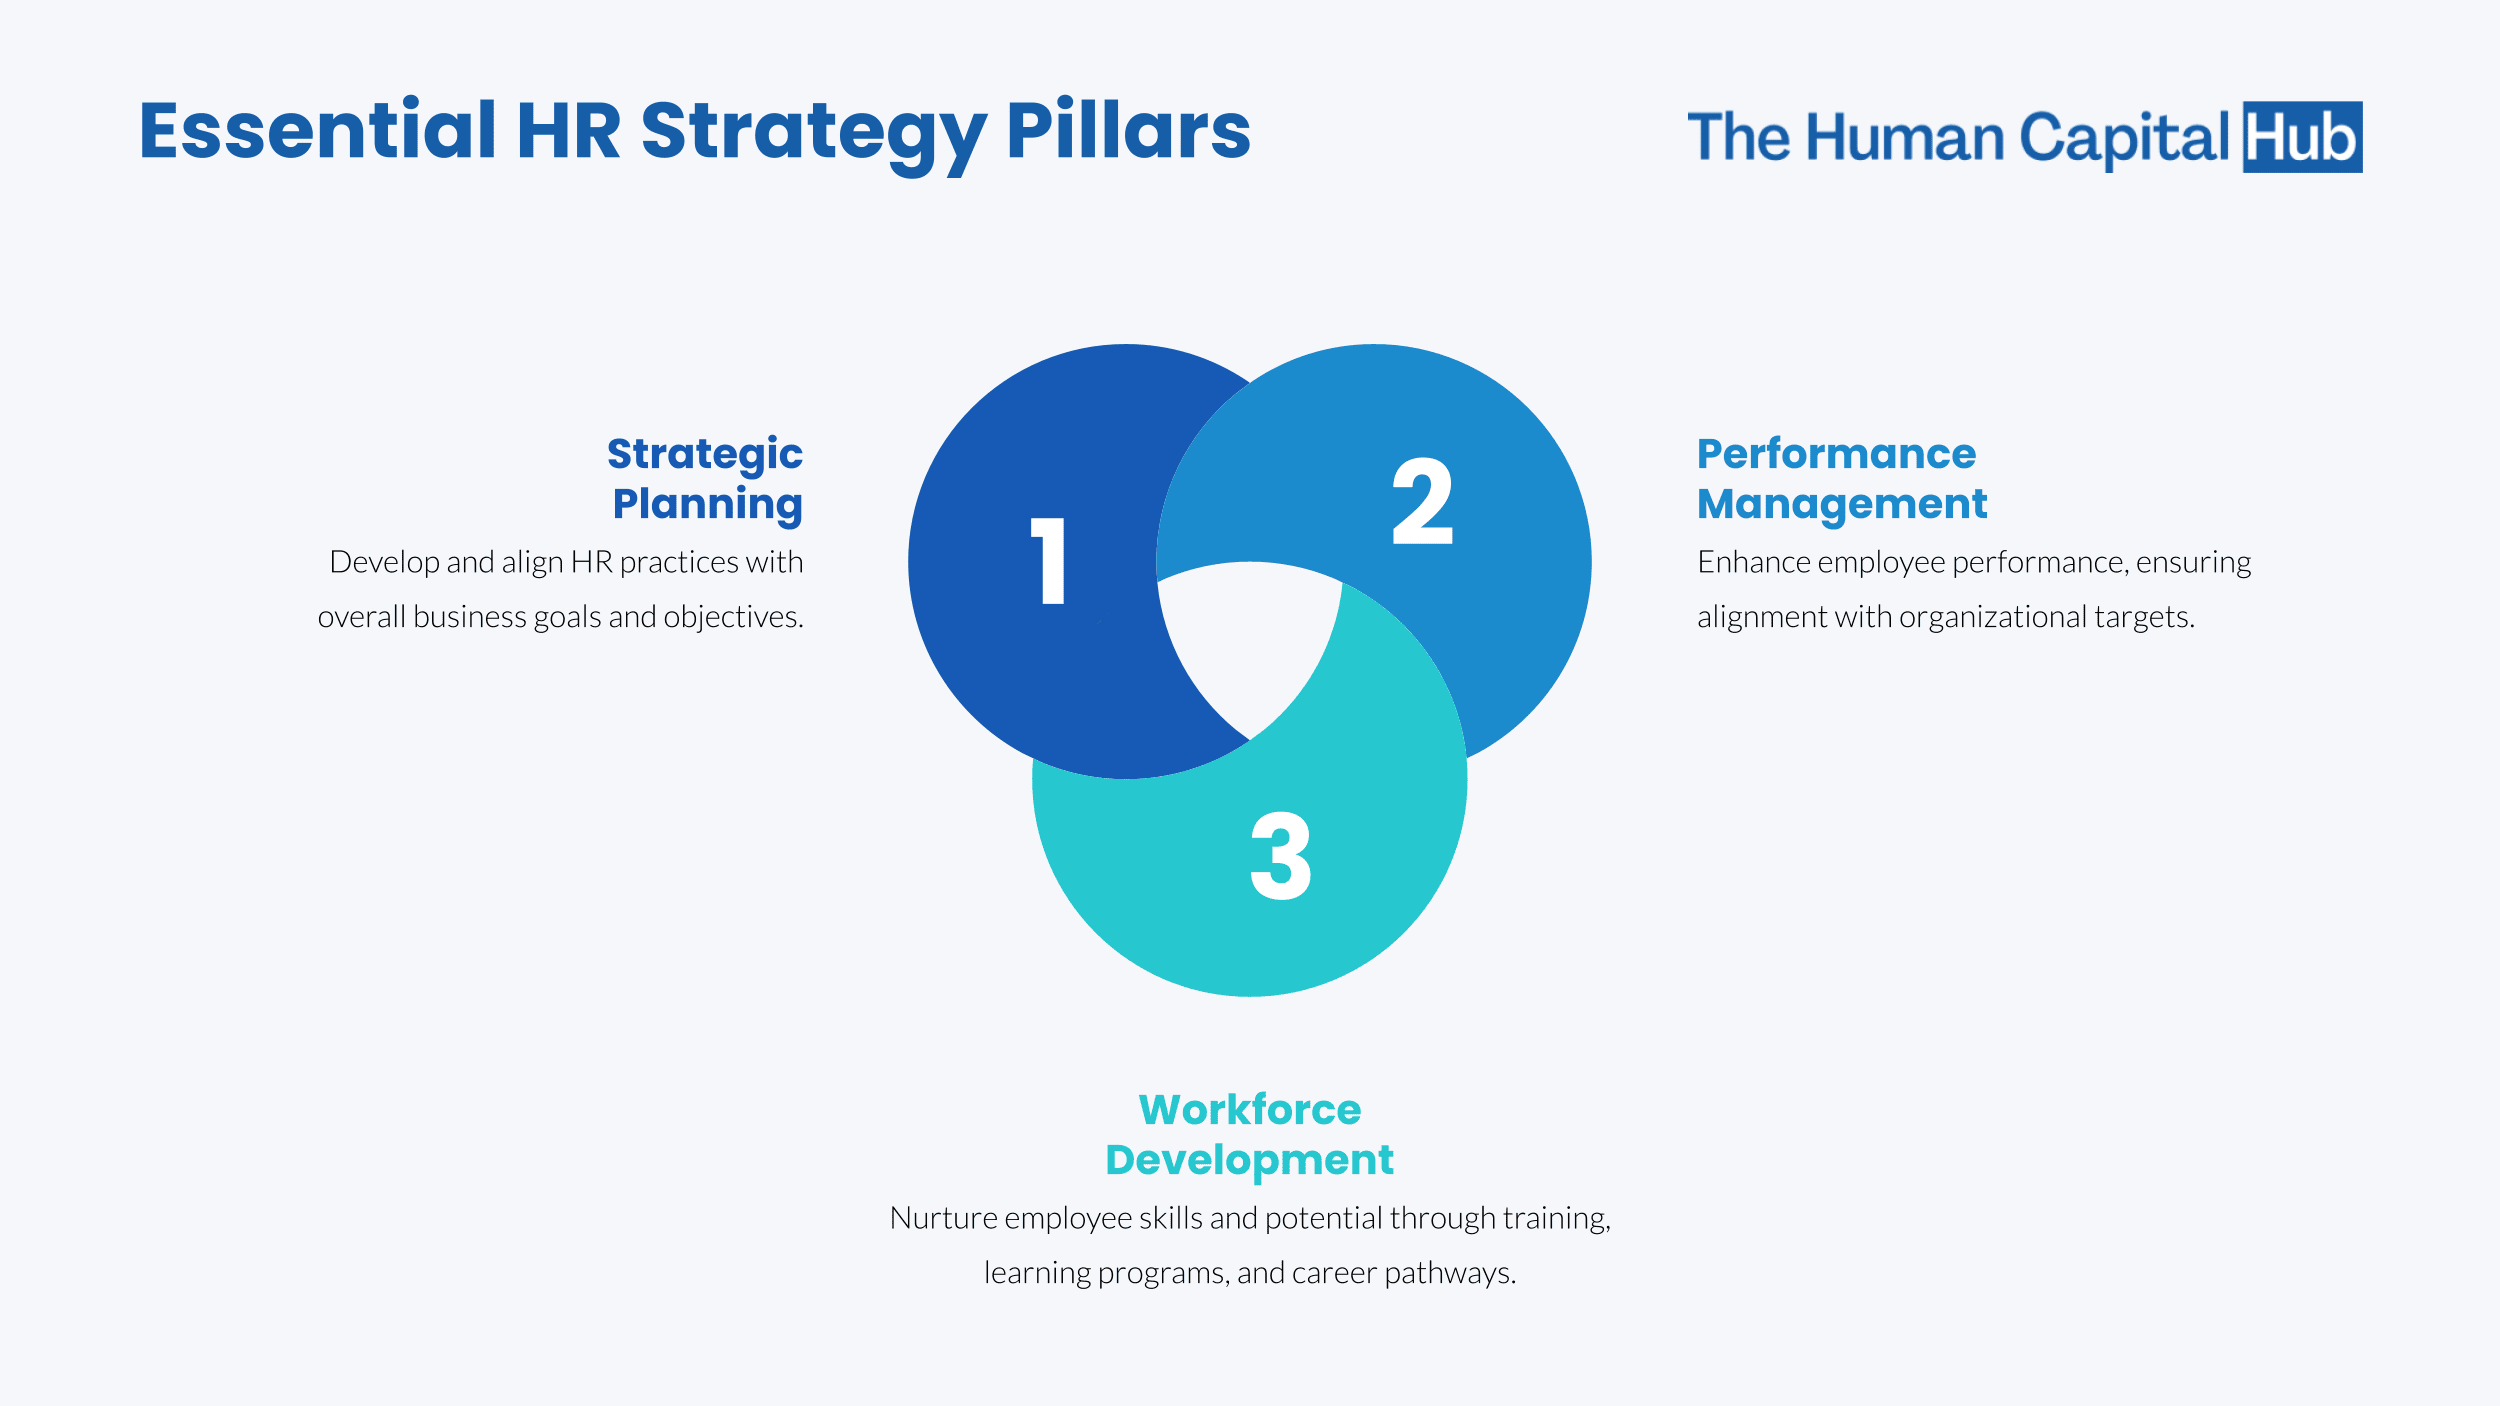 What are the 3 Pillars of HR Strategy?